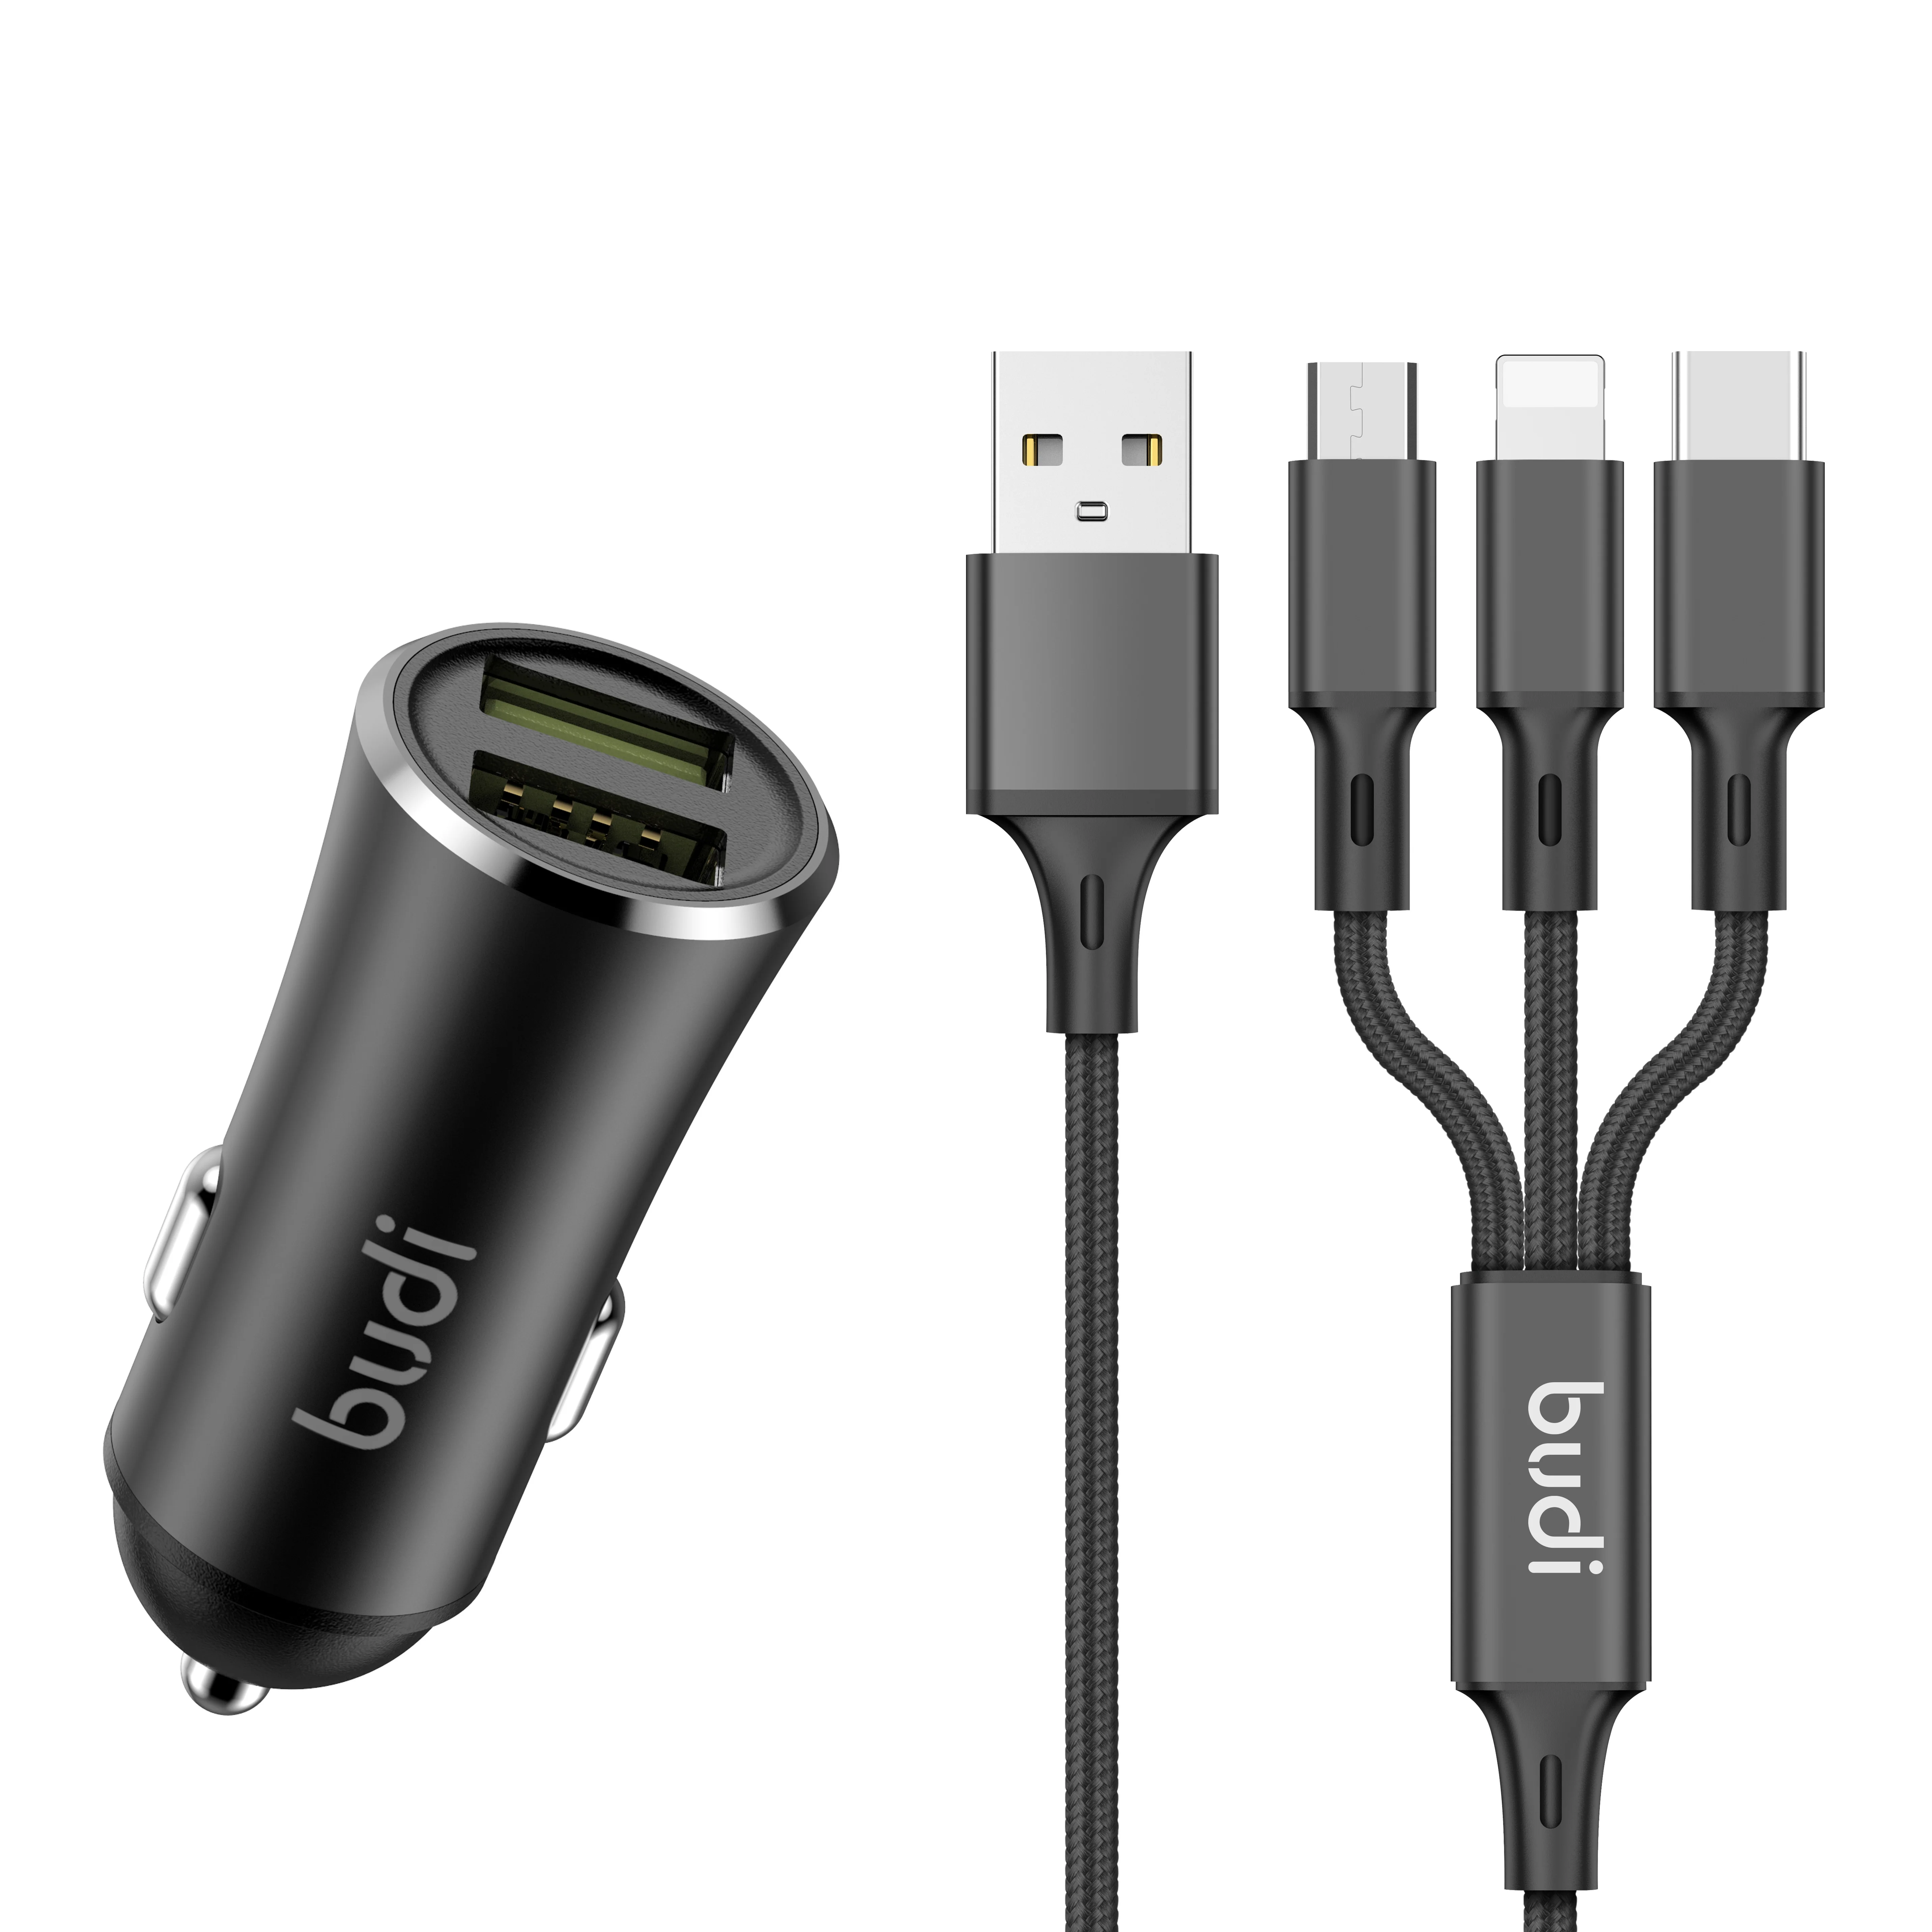 Car Accessories 2020 Phone Charger Parts 3 in 1 fast charging cable USB Quick Charge Dual Port 5V 2.4A Car USB Charger